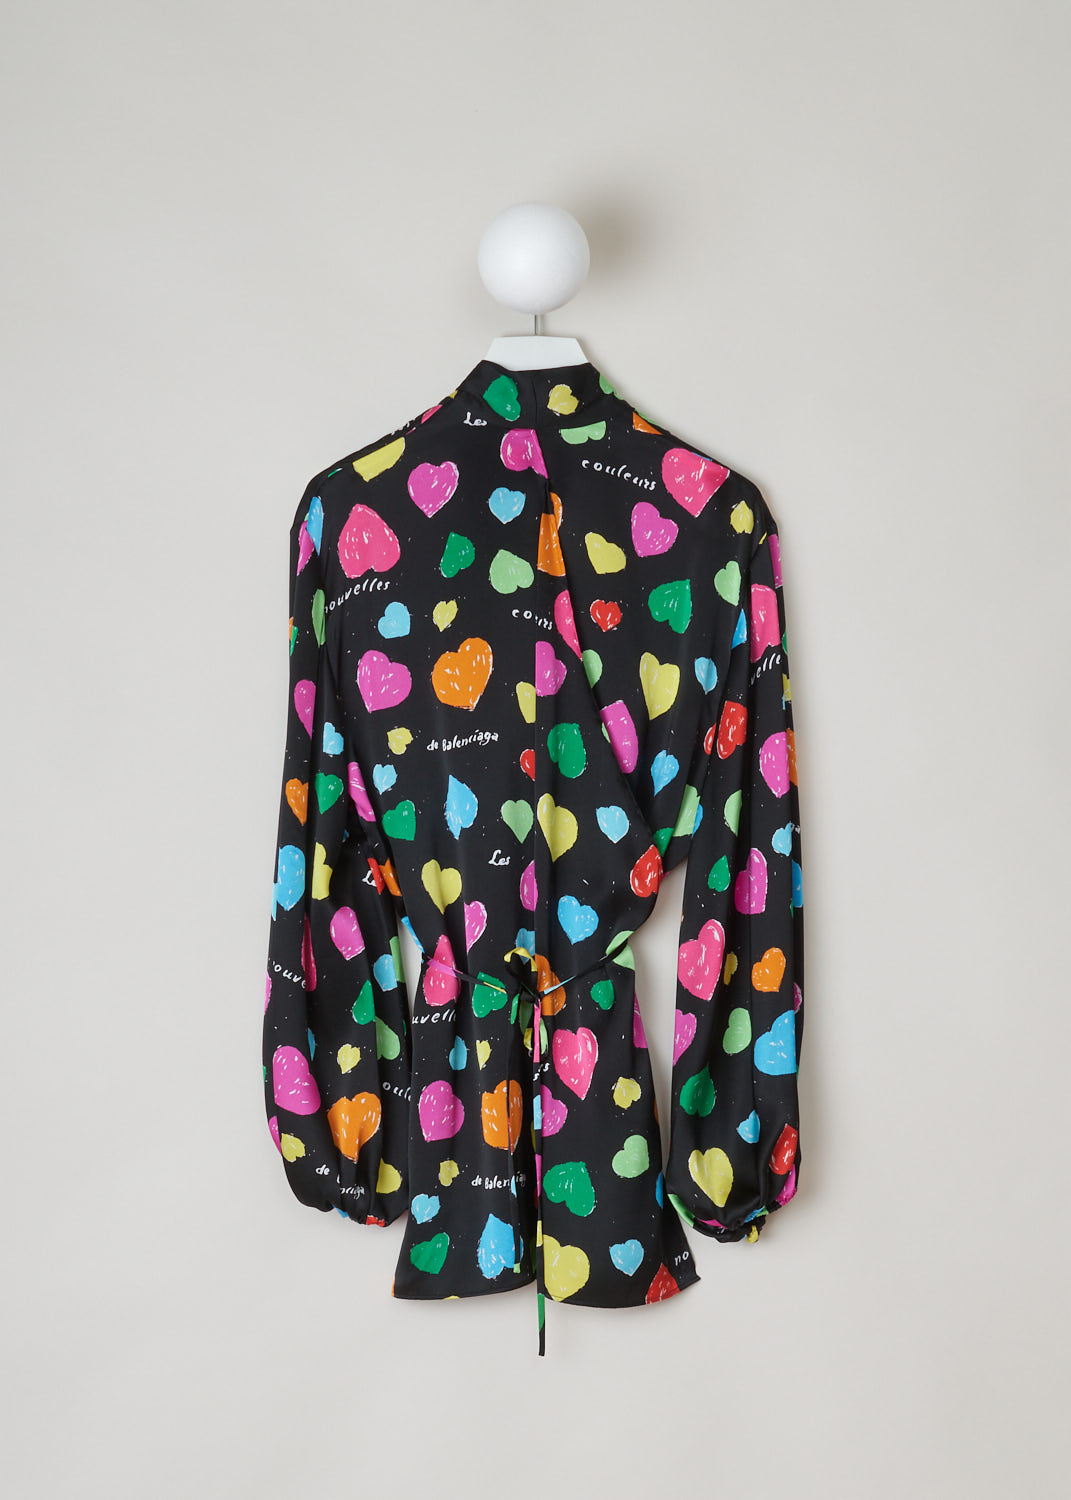 Balenciaga, Archive hearts print blouse, WL0_659088_TKL08_1000, black, pink, green, yellow, blue, print, back, This blouse features an archive hearts and text print which stands out against the black silk background. It has a self tie collar and a belted waist. The blouse also has long sleeves with elasticated cuffs. 
